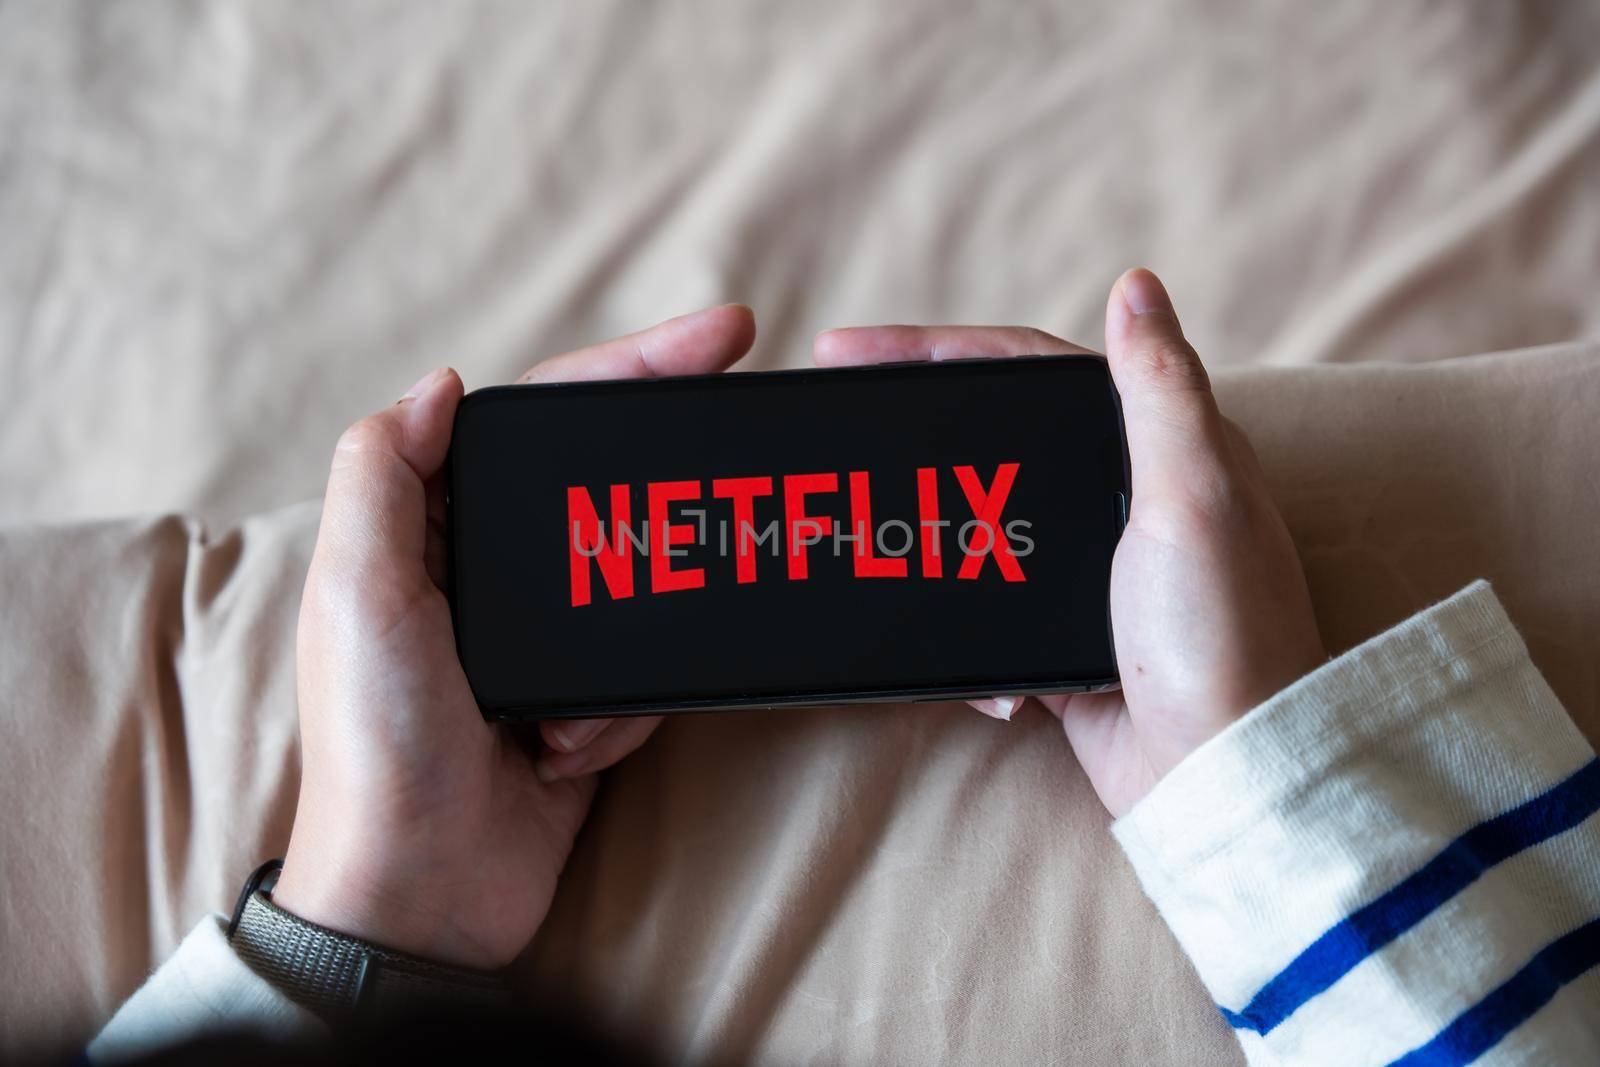 CHIANG MAI,THAILAND - APR 06, 2020 : Woman using iPhone X open Netflix application at home. Netflix is a global provider of streaming movies and TV series.